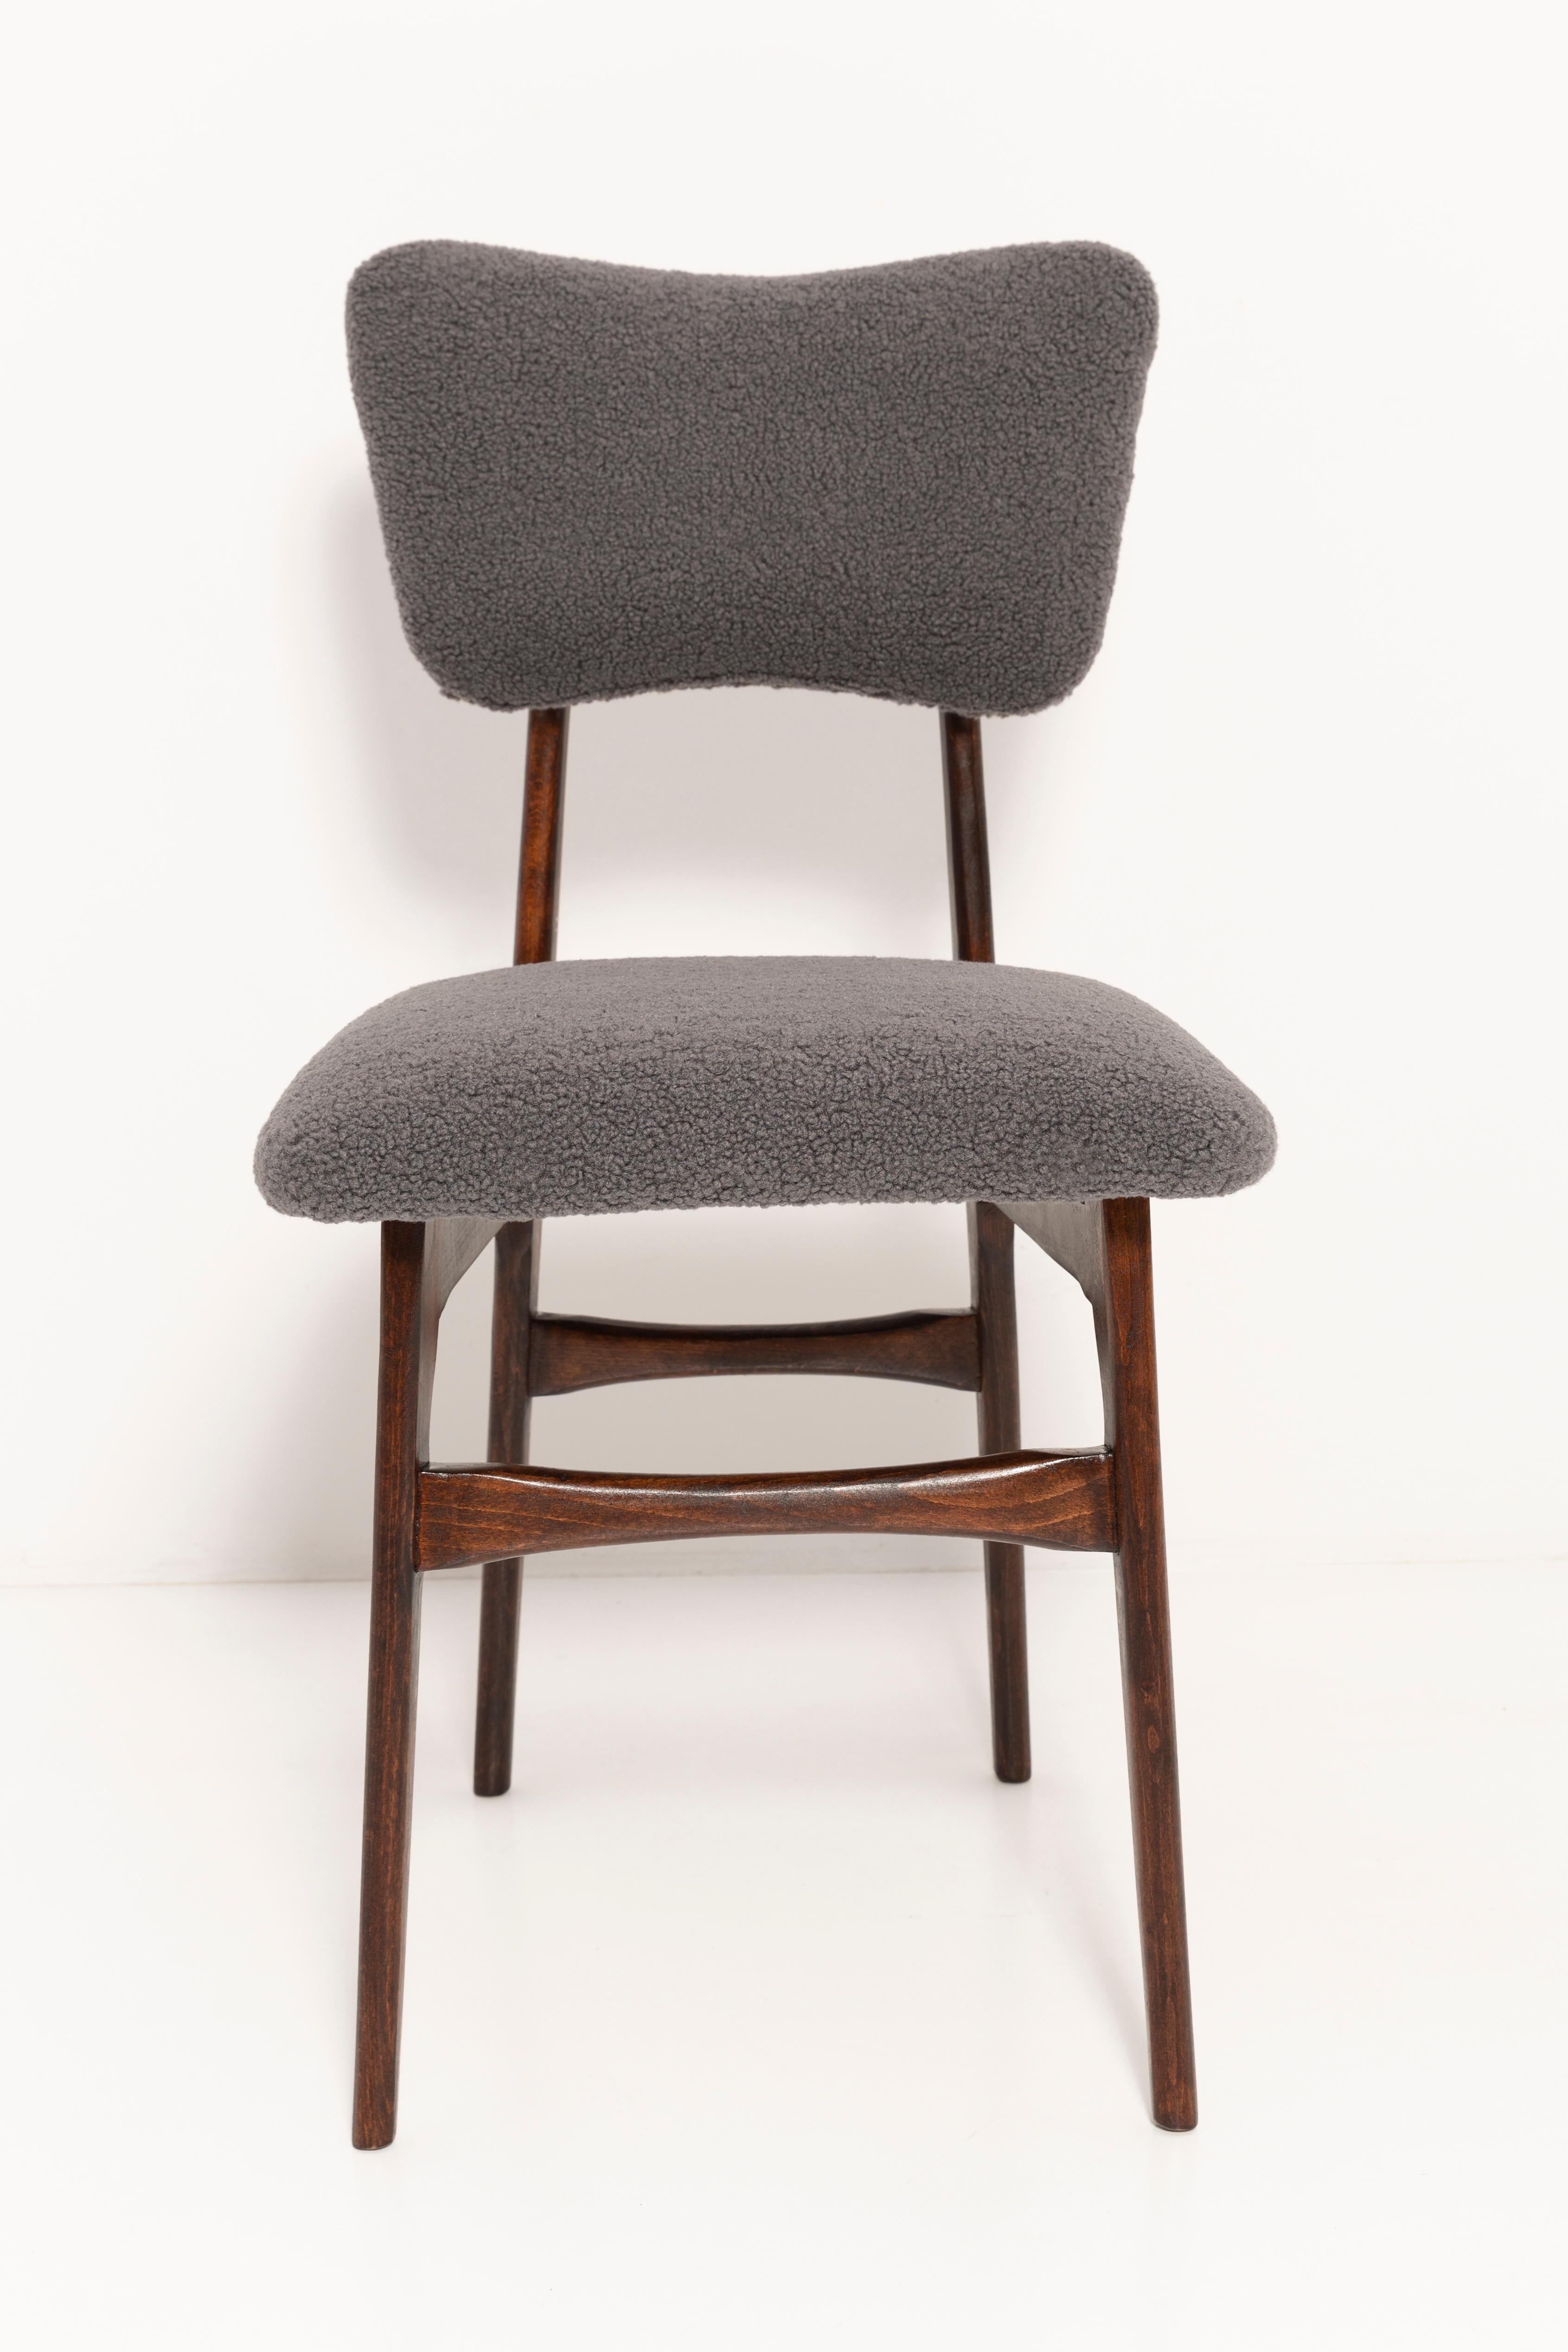 Set of Six Dark Gray Boucle 'Butterfly' Chairs, Europe, 1960s For Sale 1